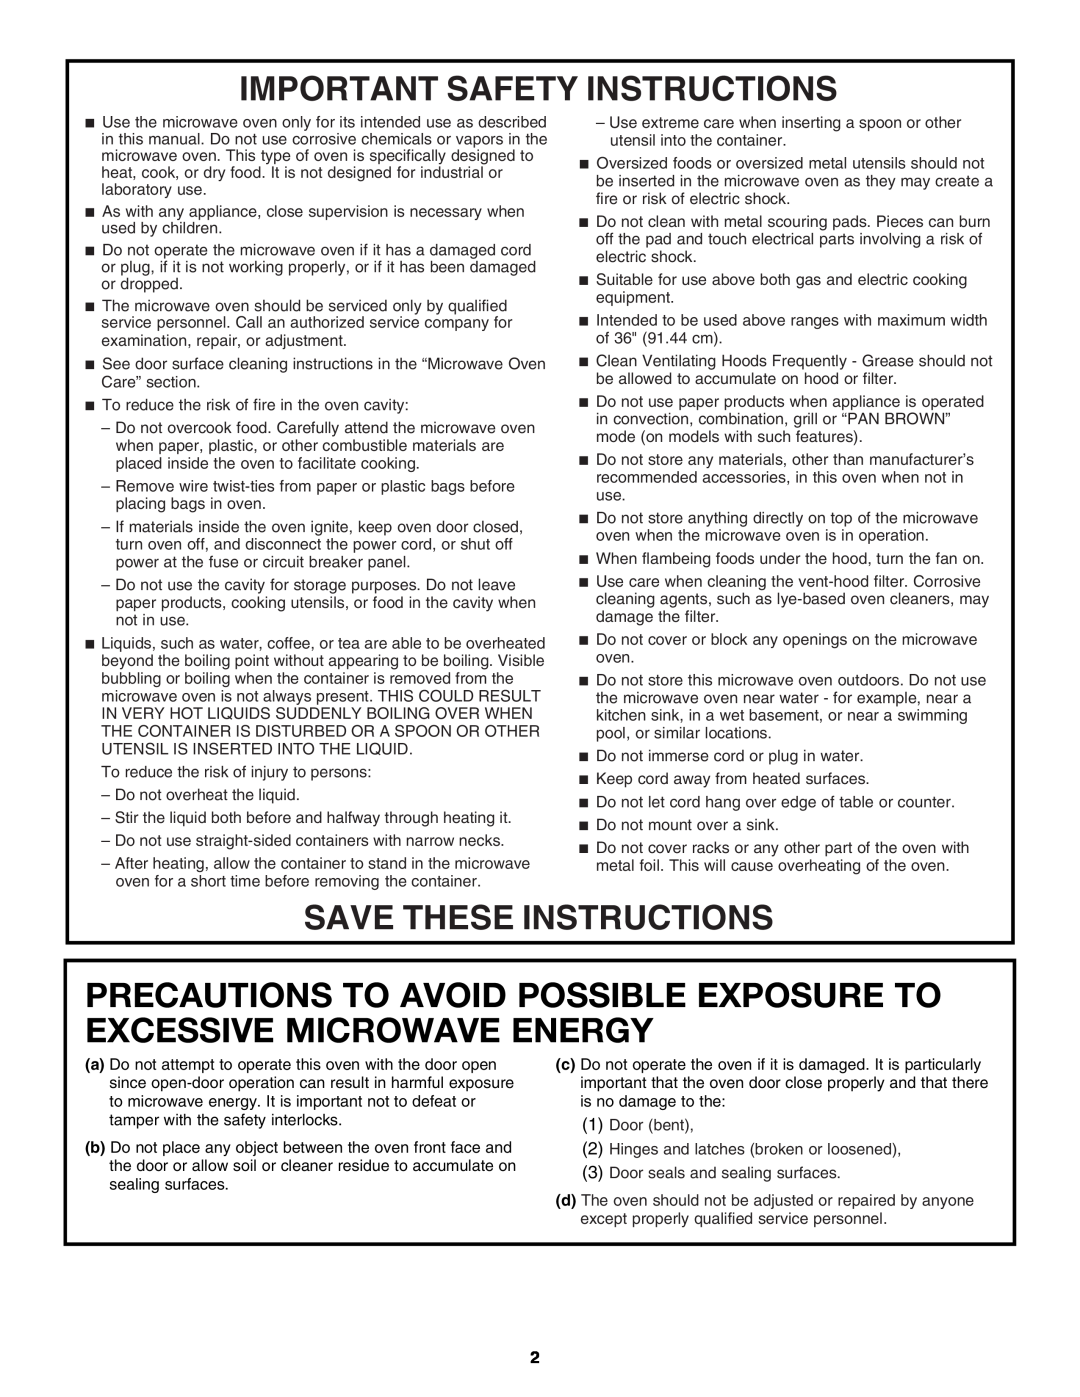 Amana W10208077A Precautions To Avoid Possible Exposure To Excessive Microwave Energy, Important Safety Instructions 